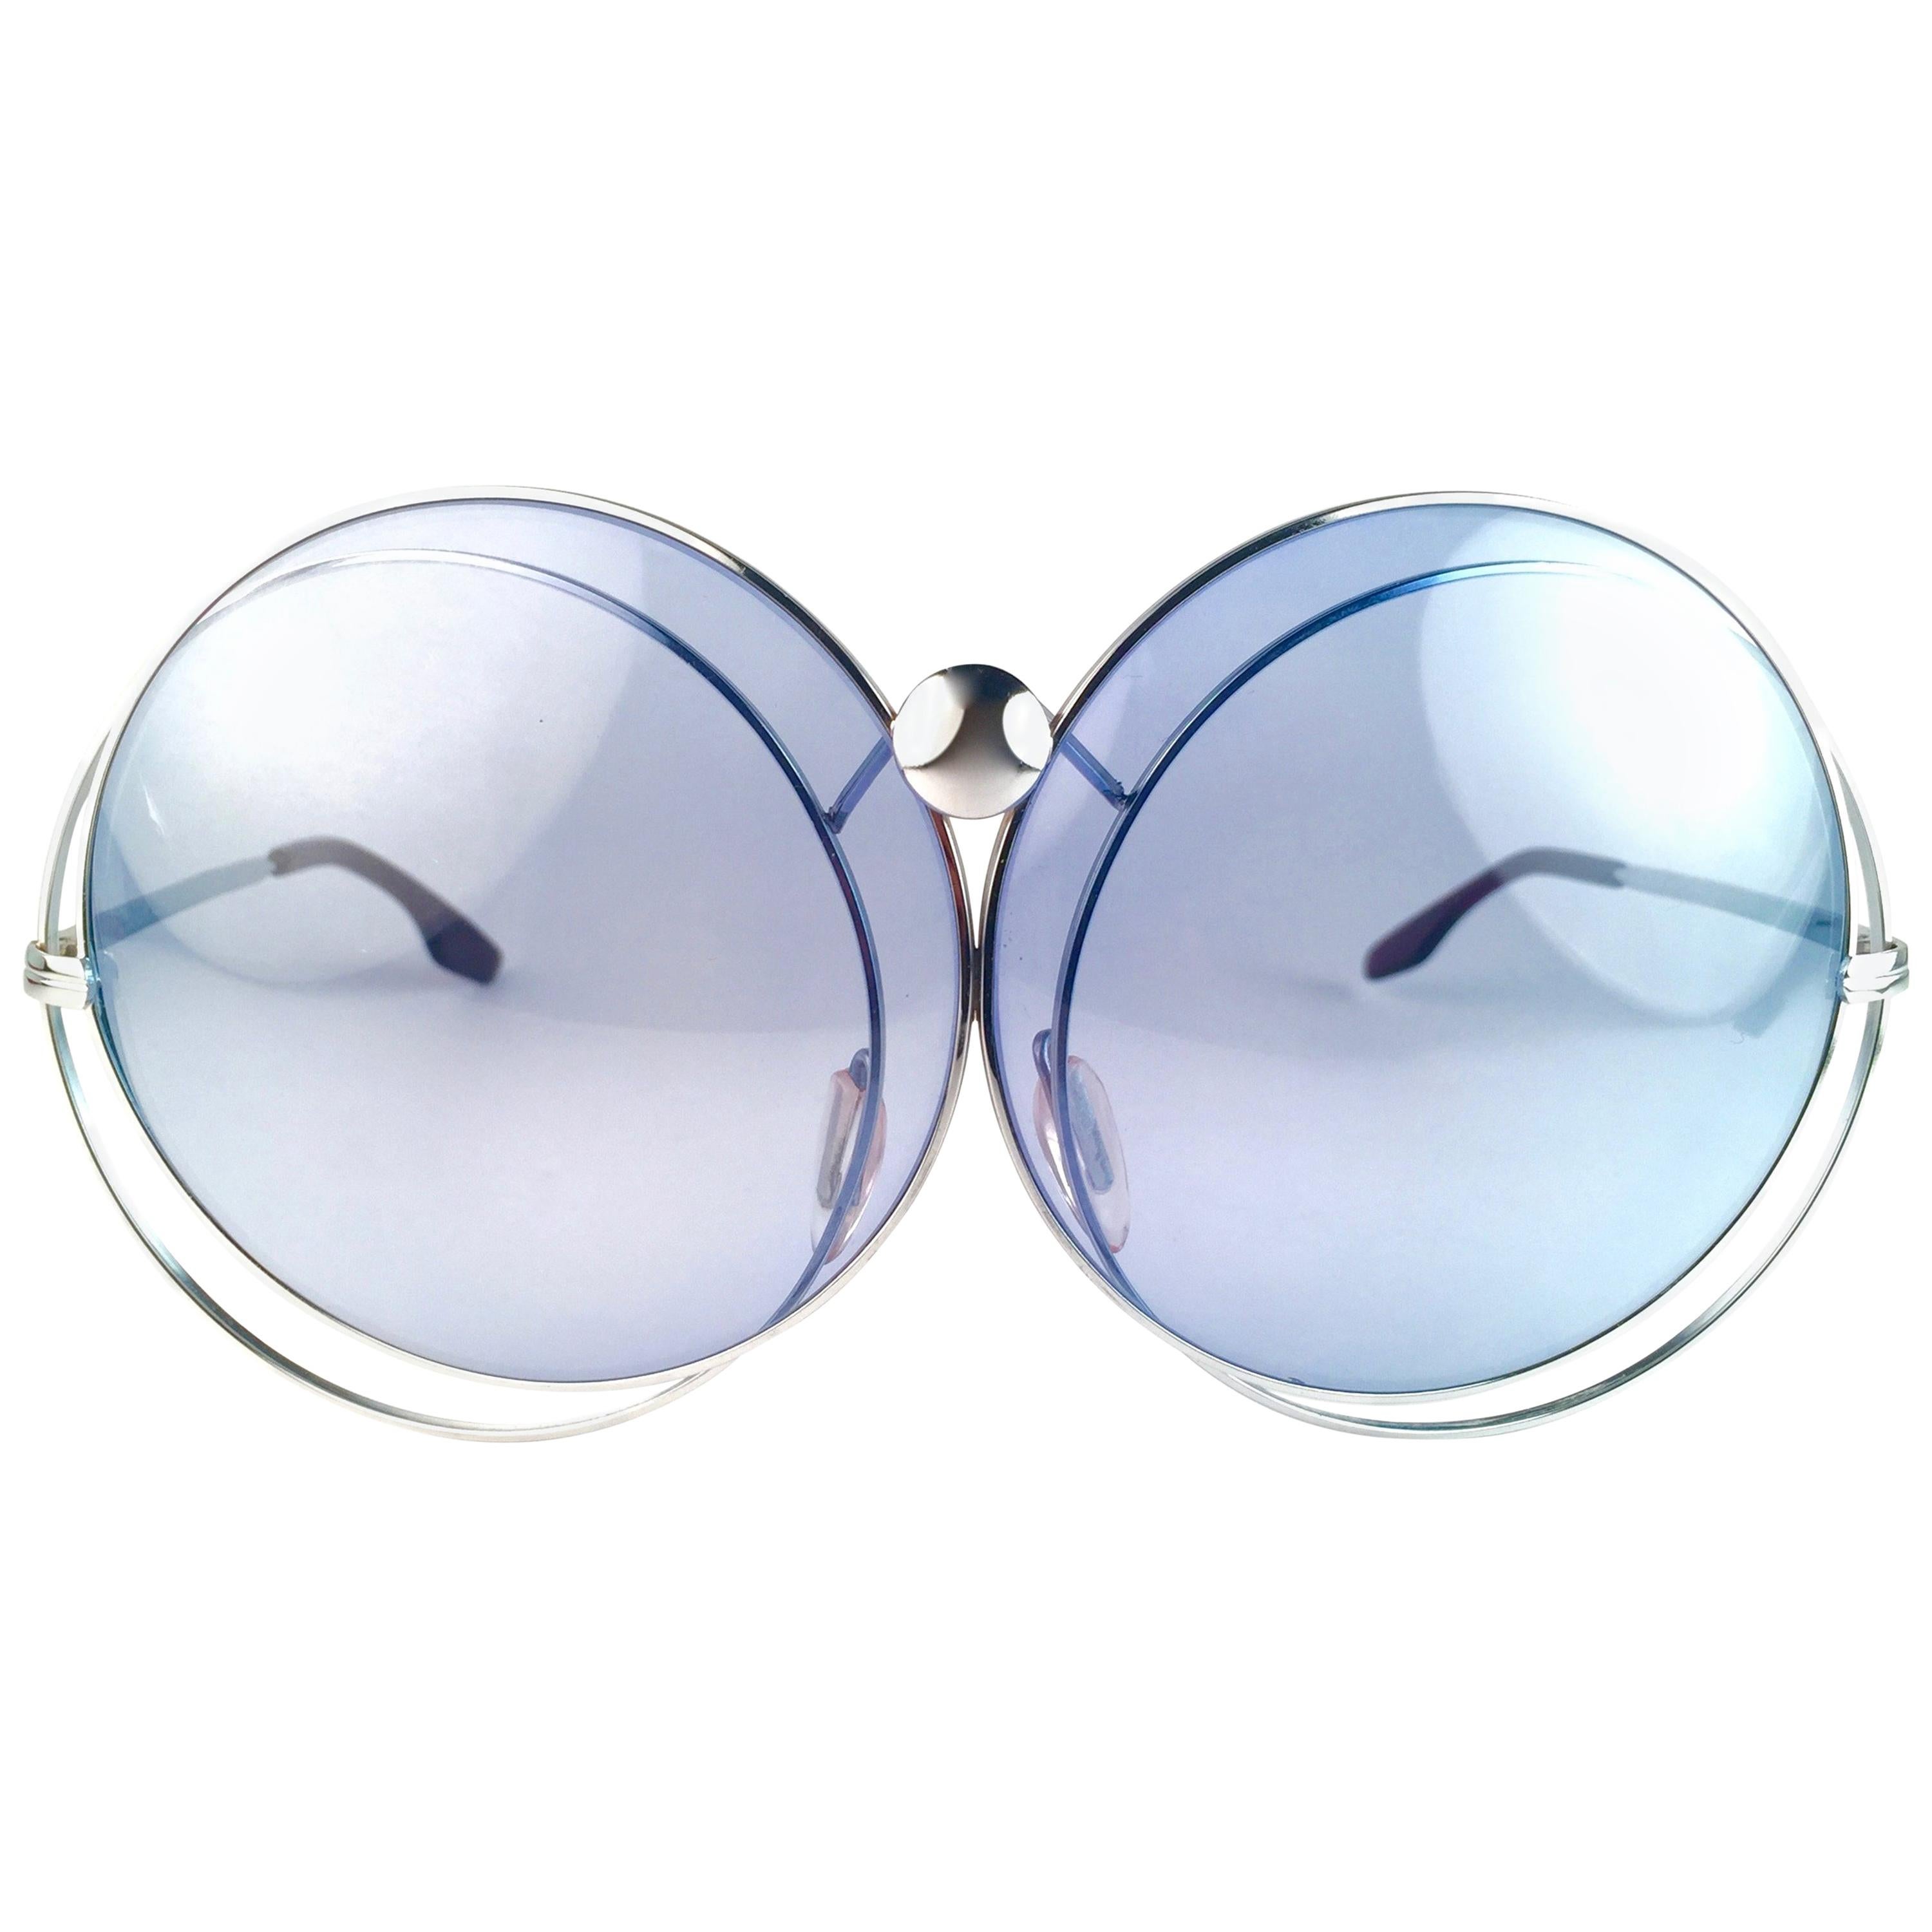 New Rare Vintage Christian Dior Oversized Silver Metal Round Sunglasses 1970's For Sale